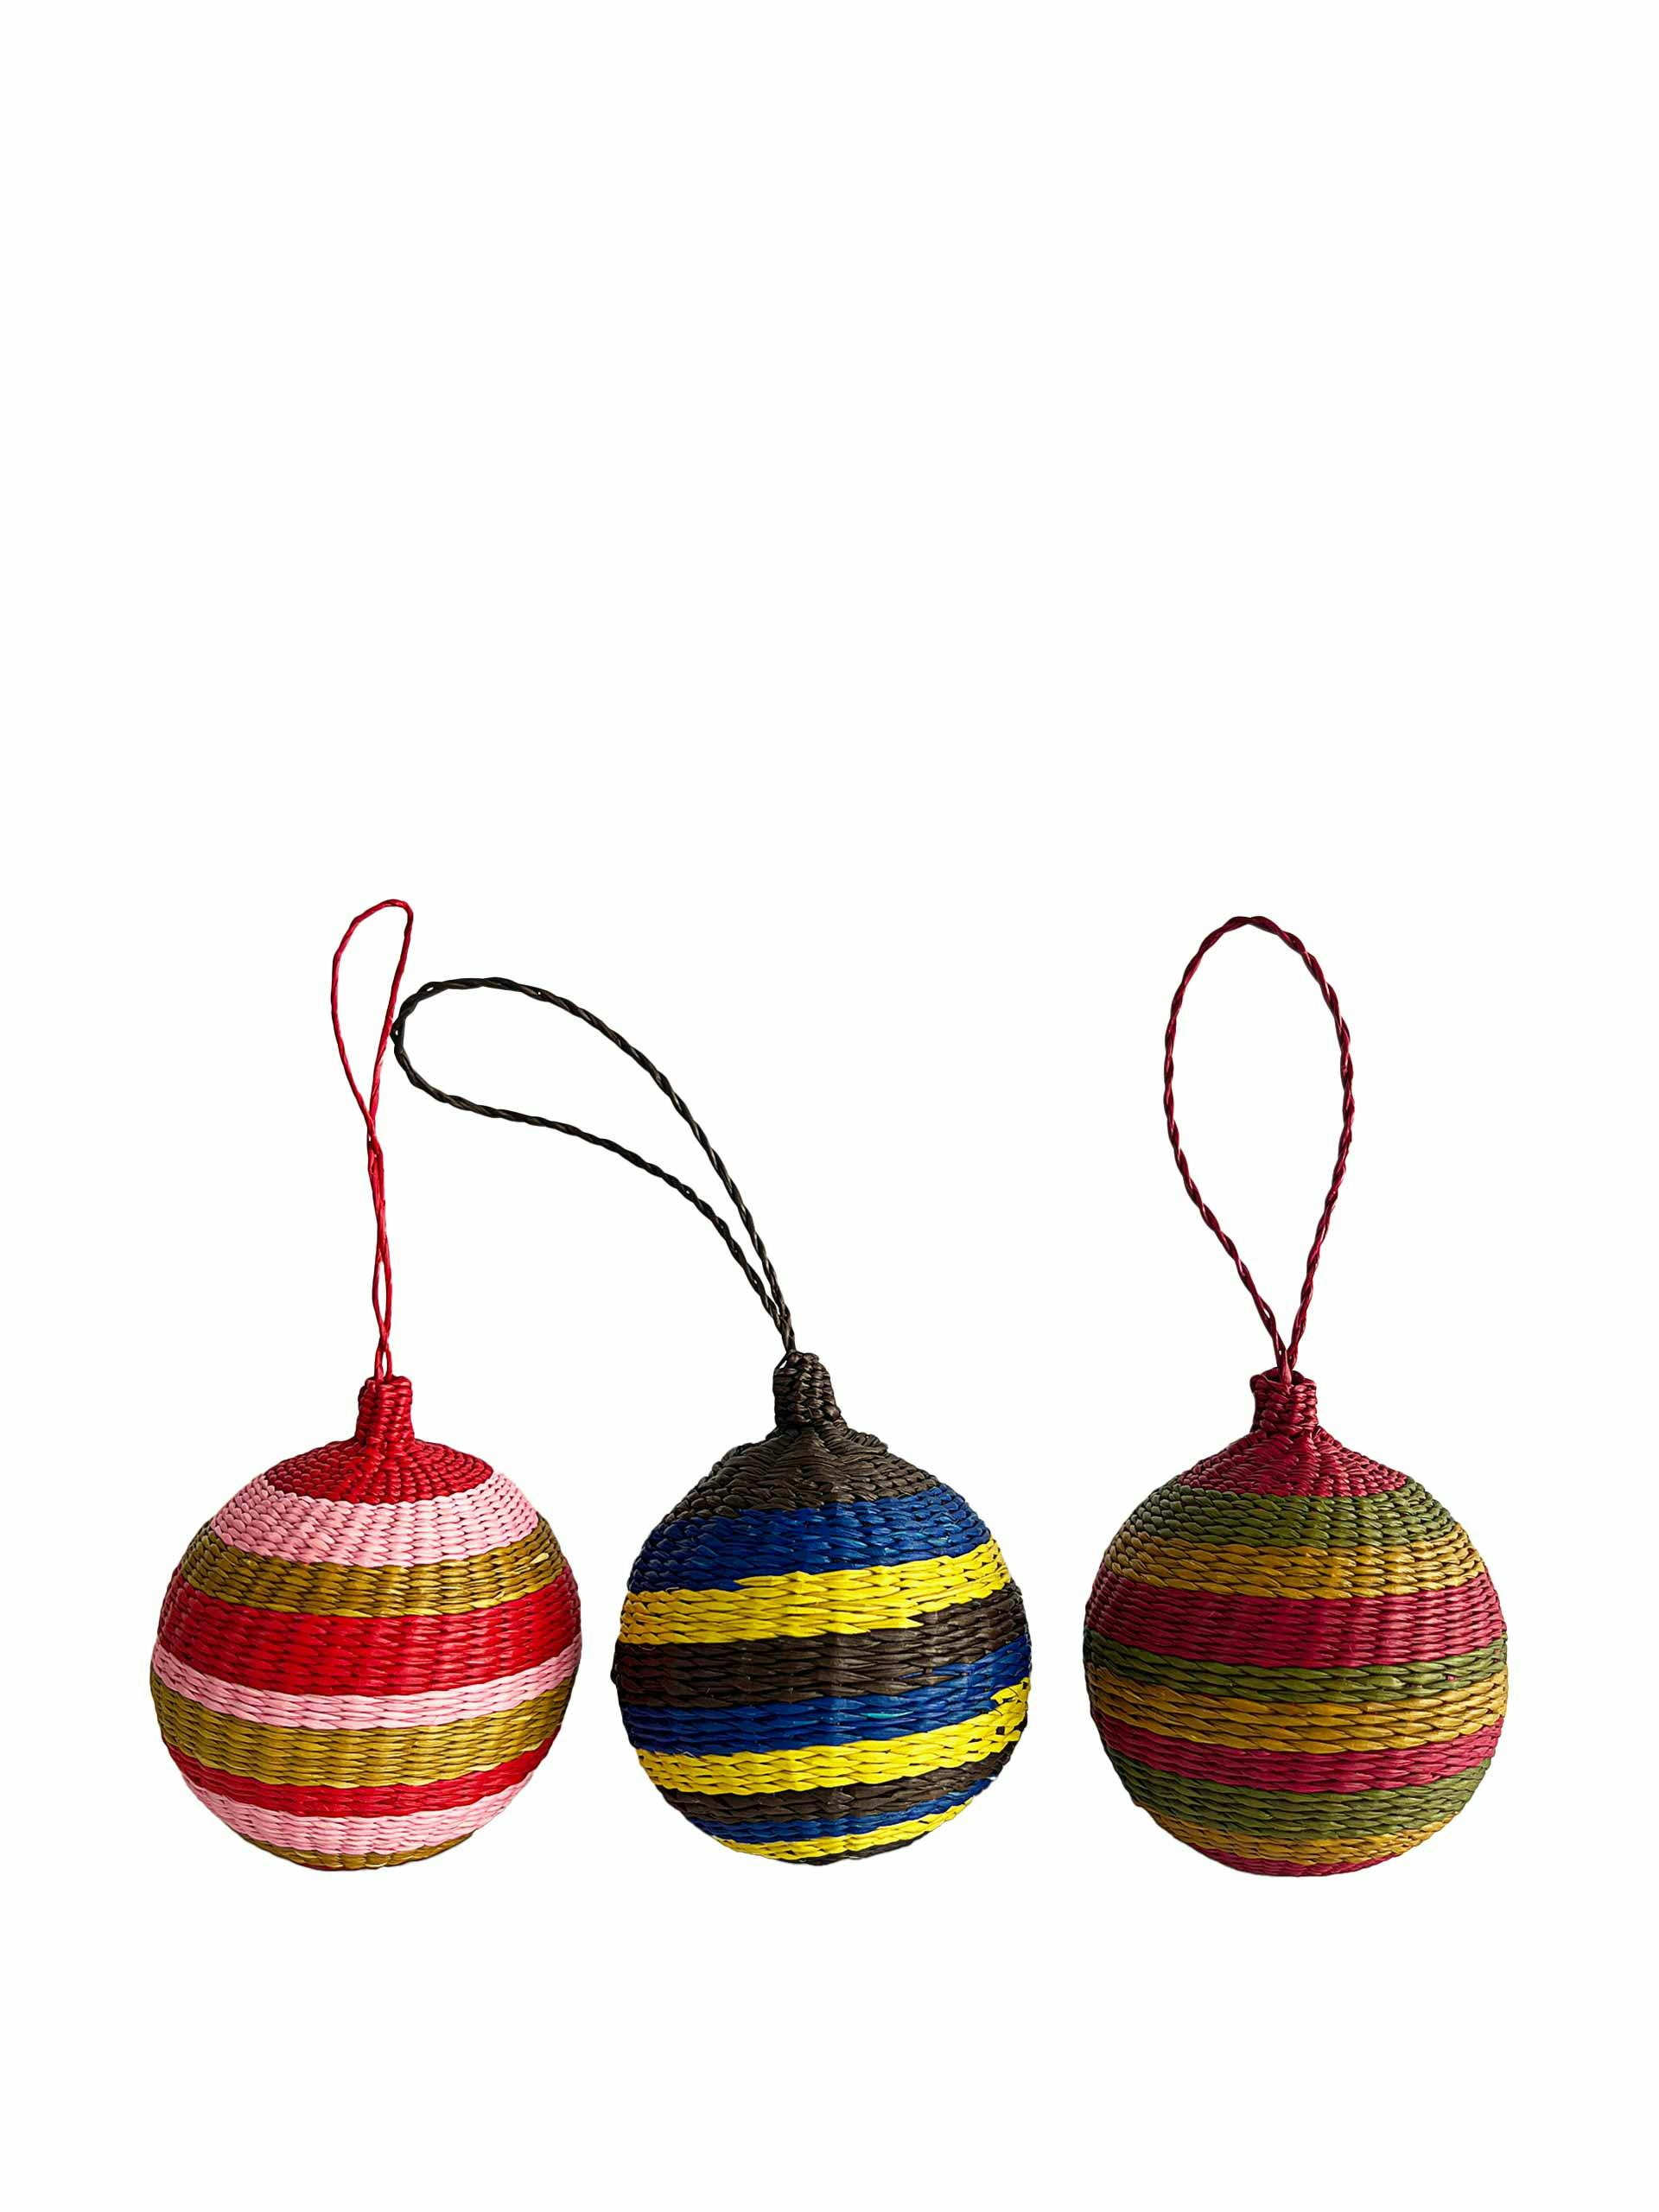 Collagerie x The Colombia Collective Raya woven baubles, set of 3